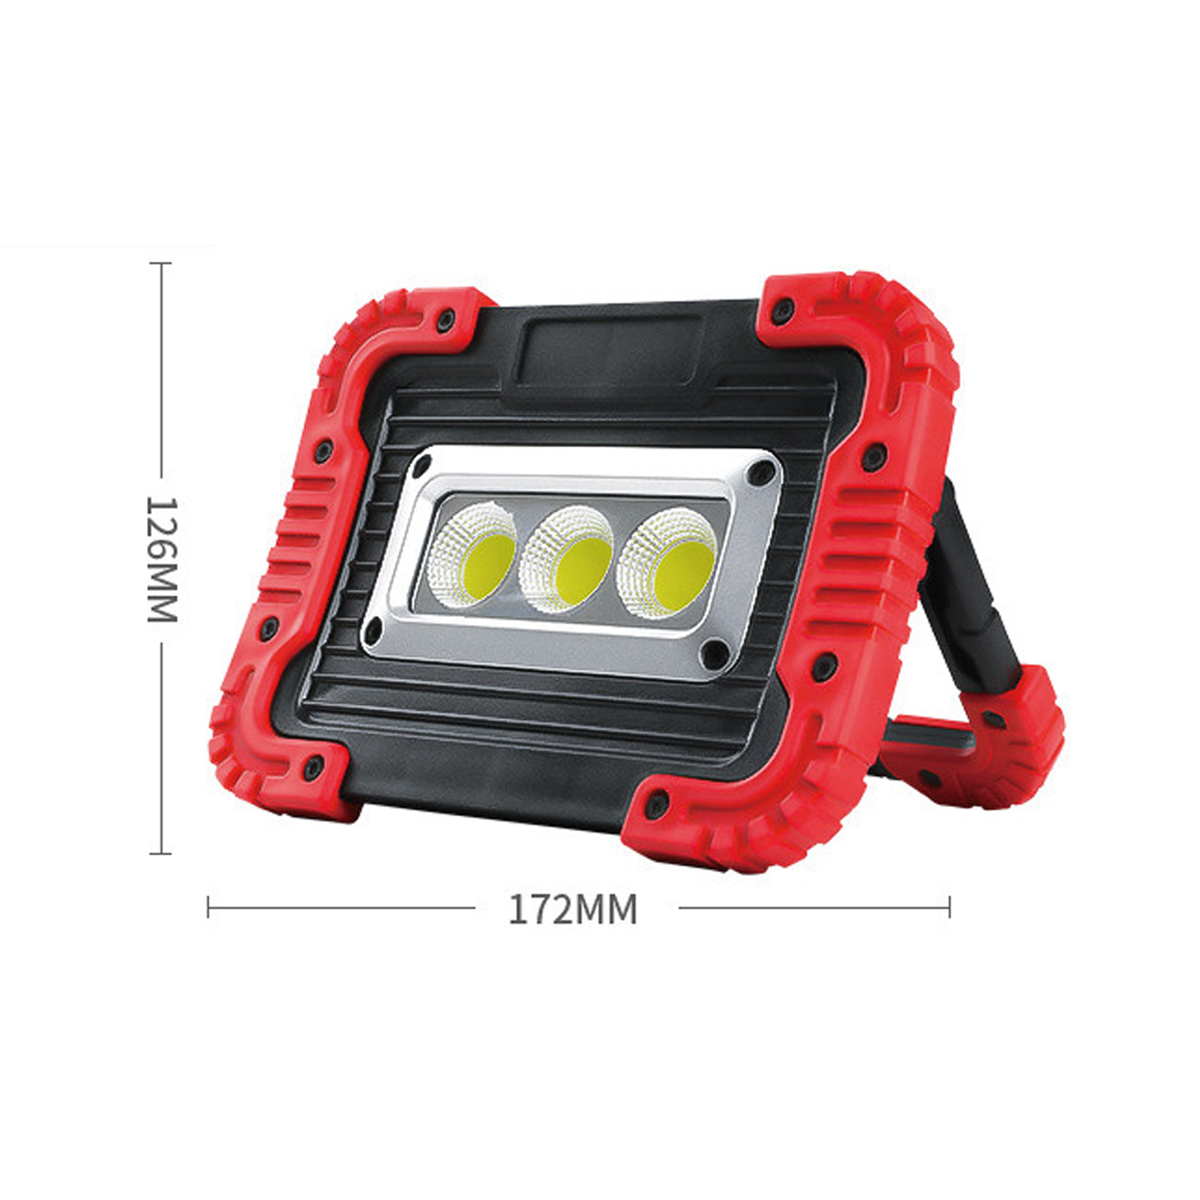 380W-Work-Flood-Light-Rechargeable-Portable-COB-LED-Spot-Lamp-Outdoor-Camping-1654485-10